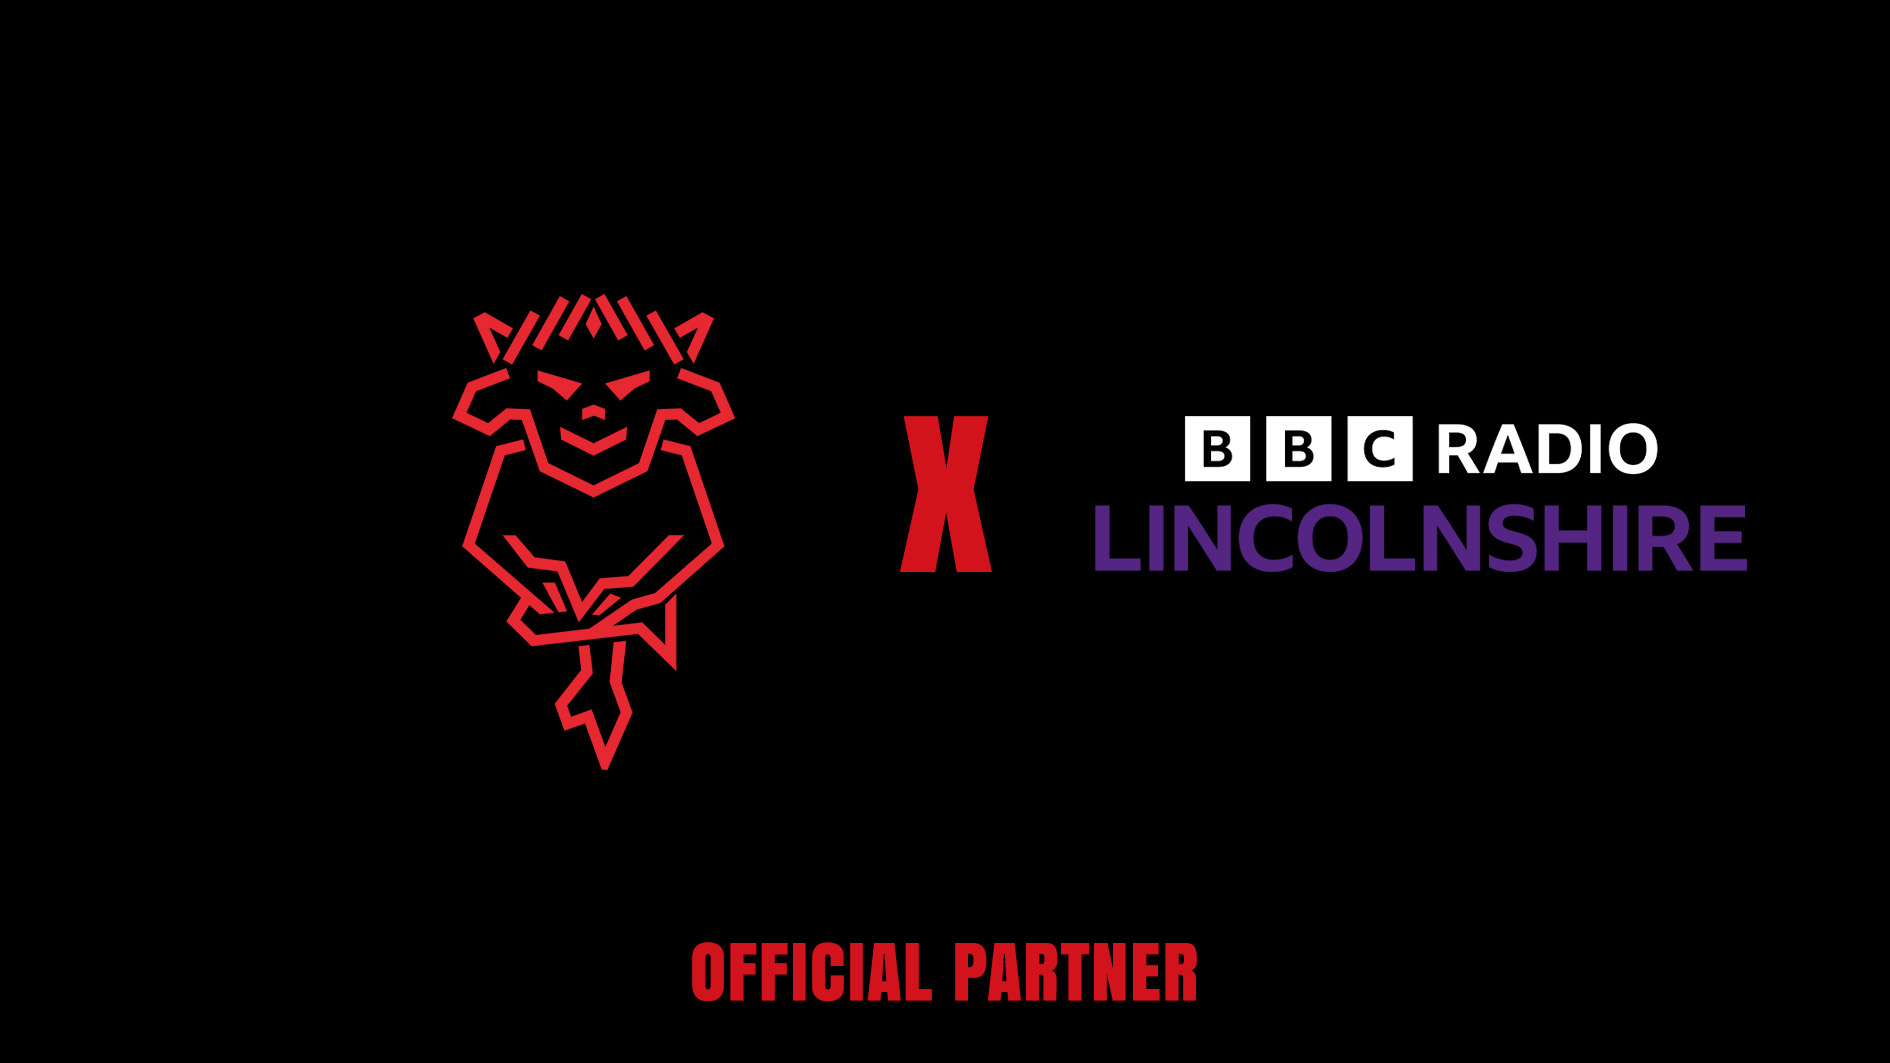 A graphic featuring the Lincoln City and Radio Lincolnshire logos